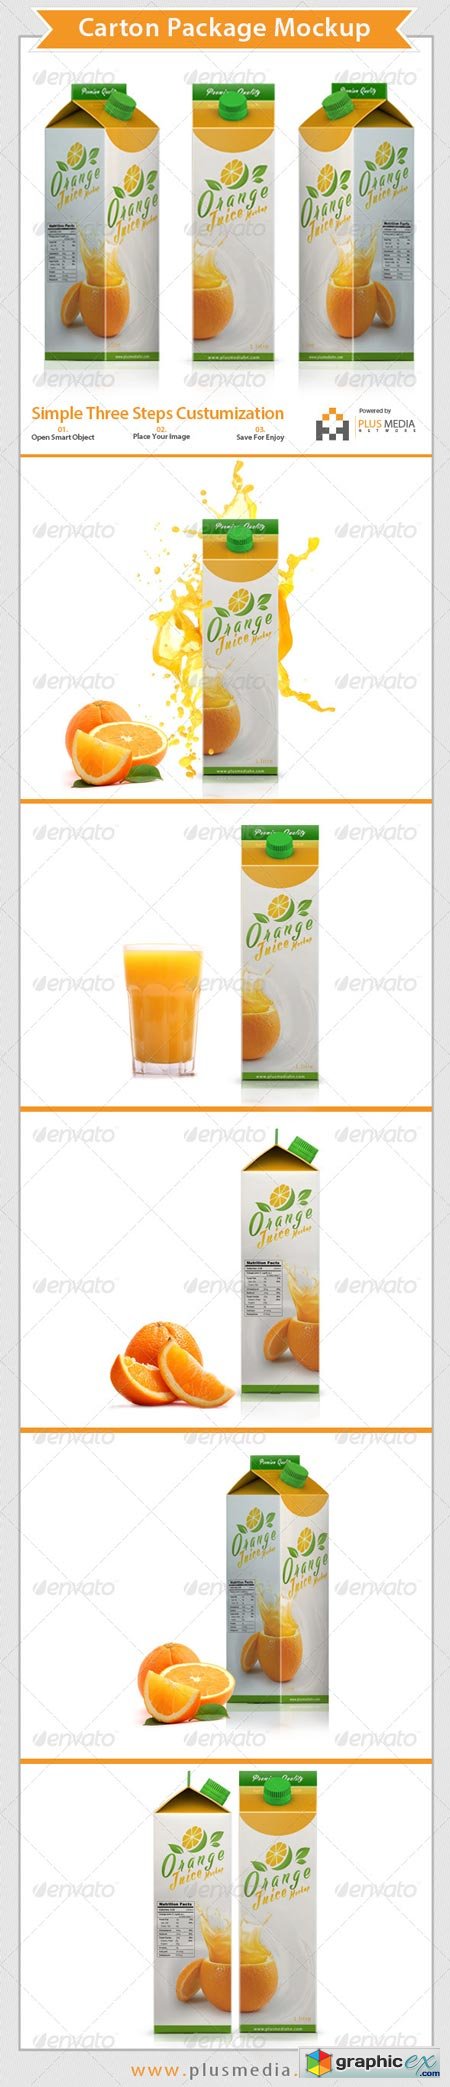 Carton Package for Juice Mockup 6621870